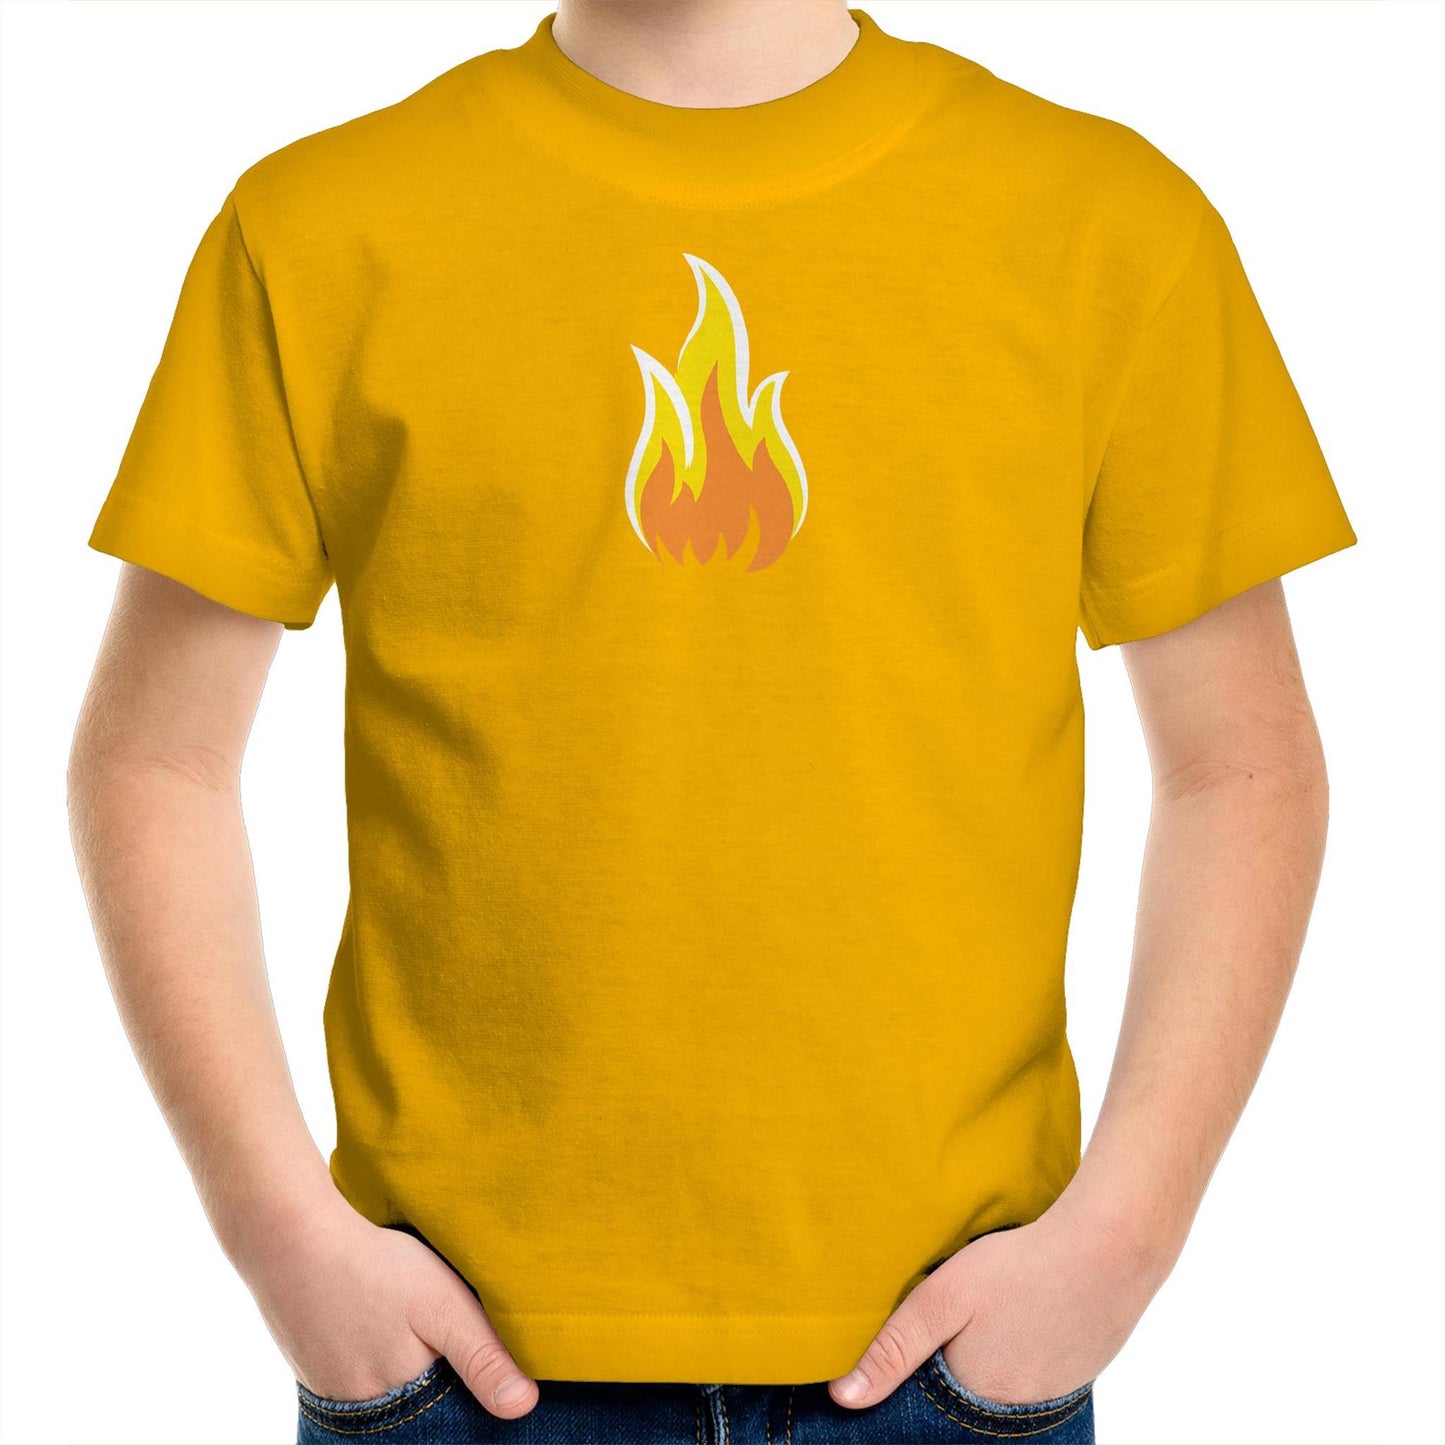 Flame T Shirts for Kids